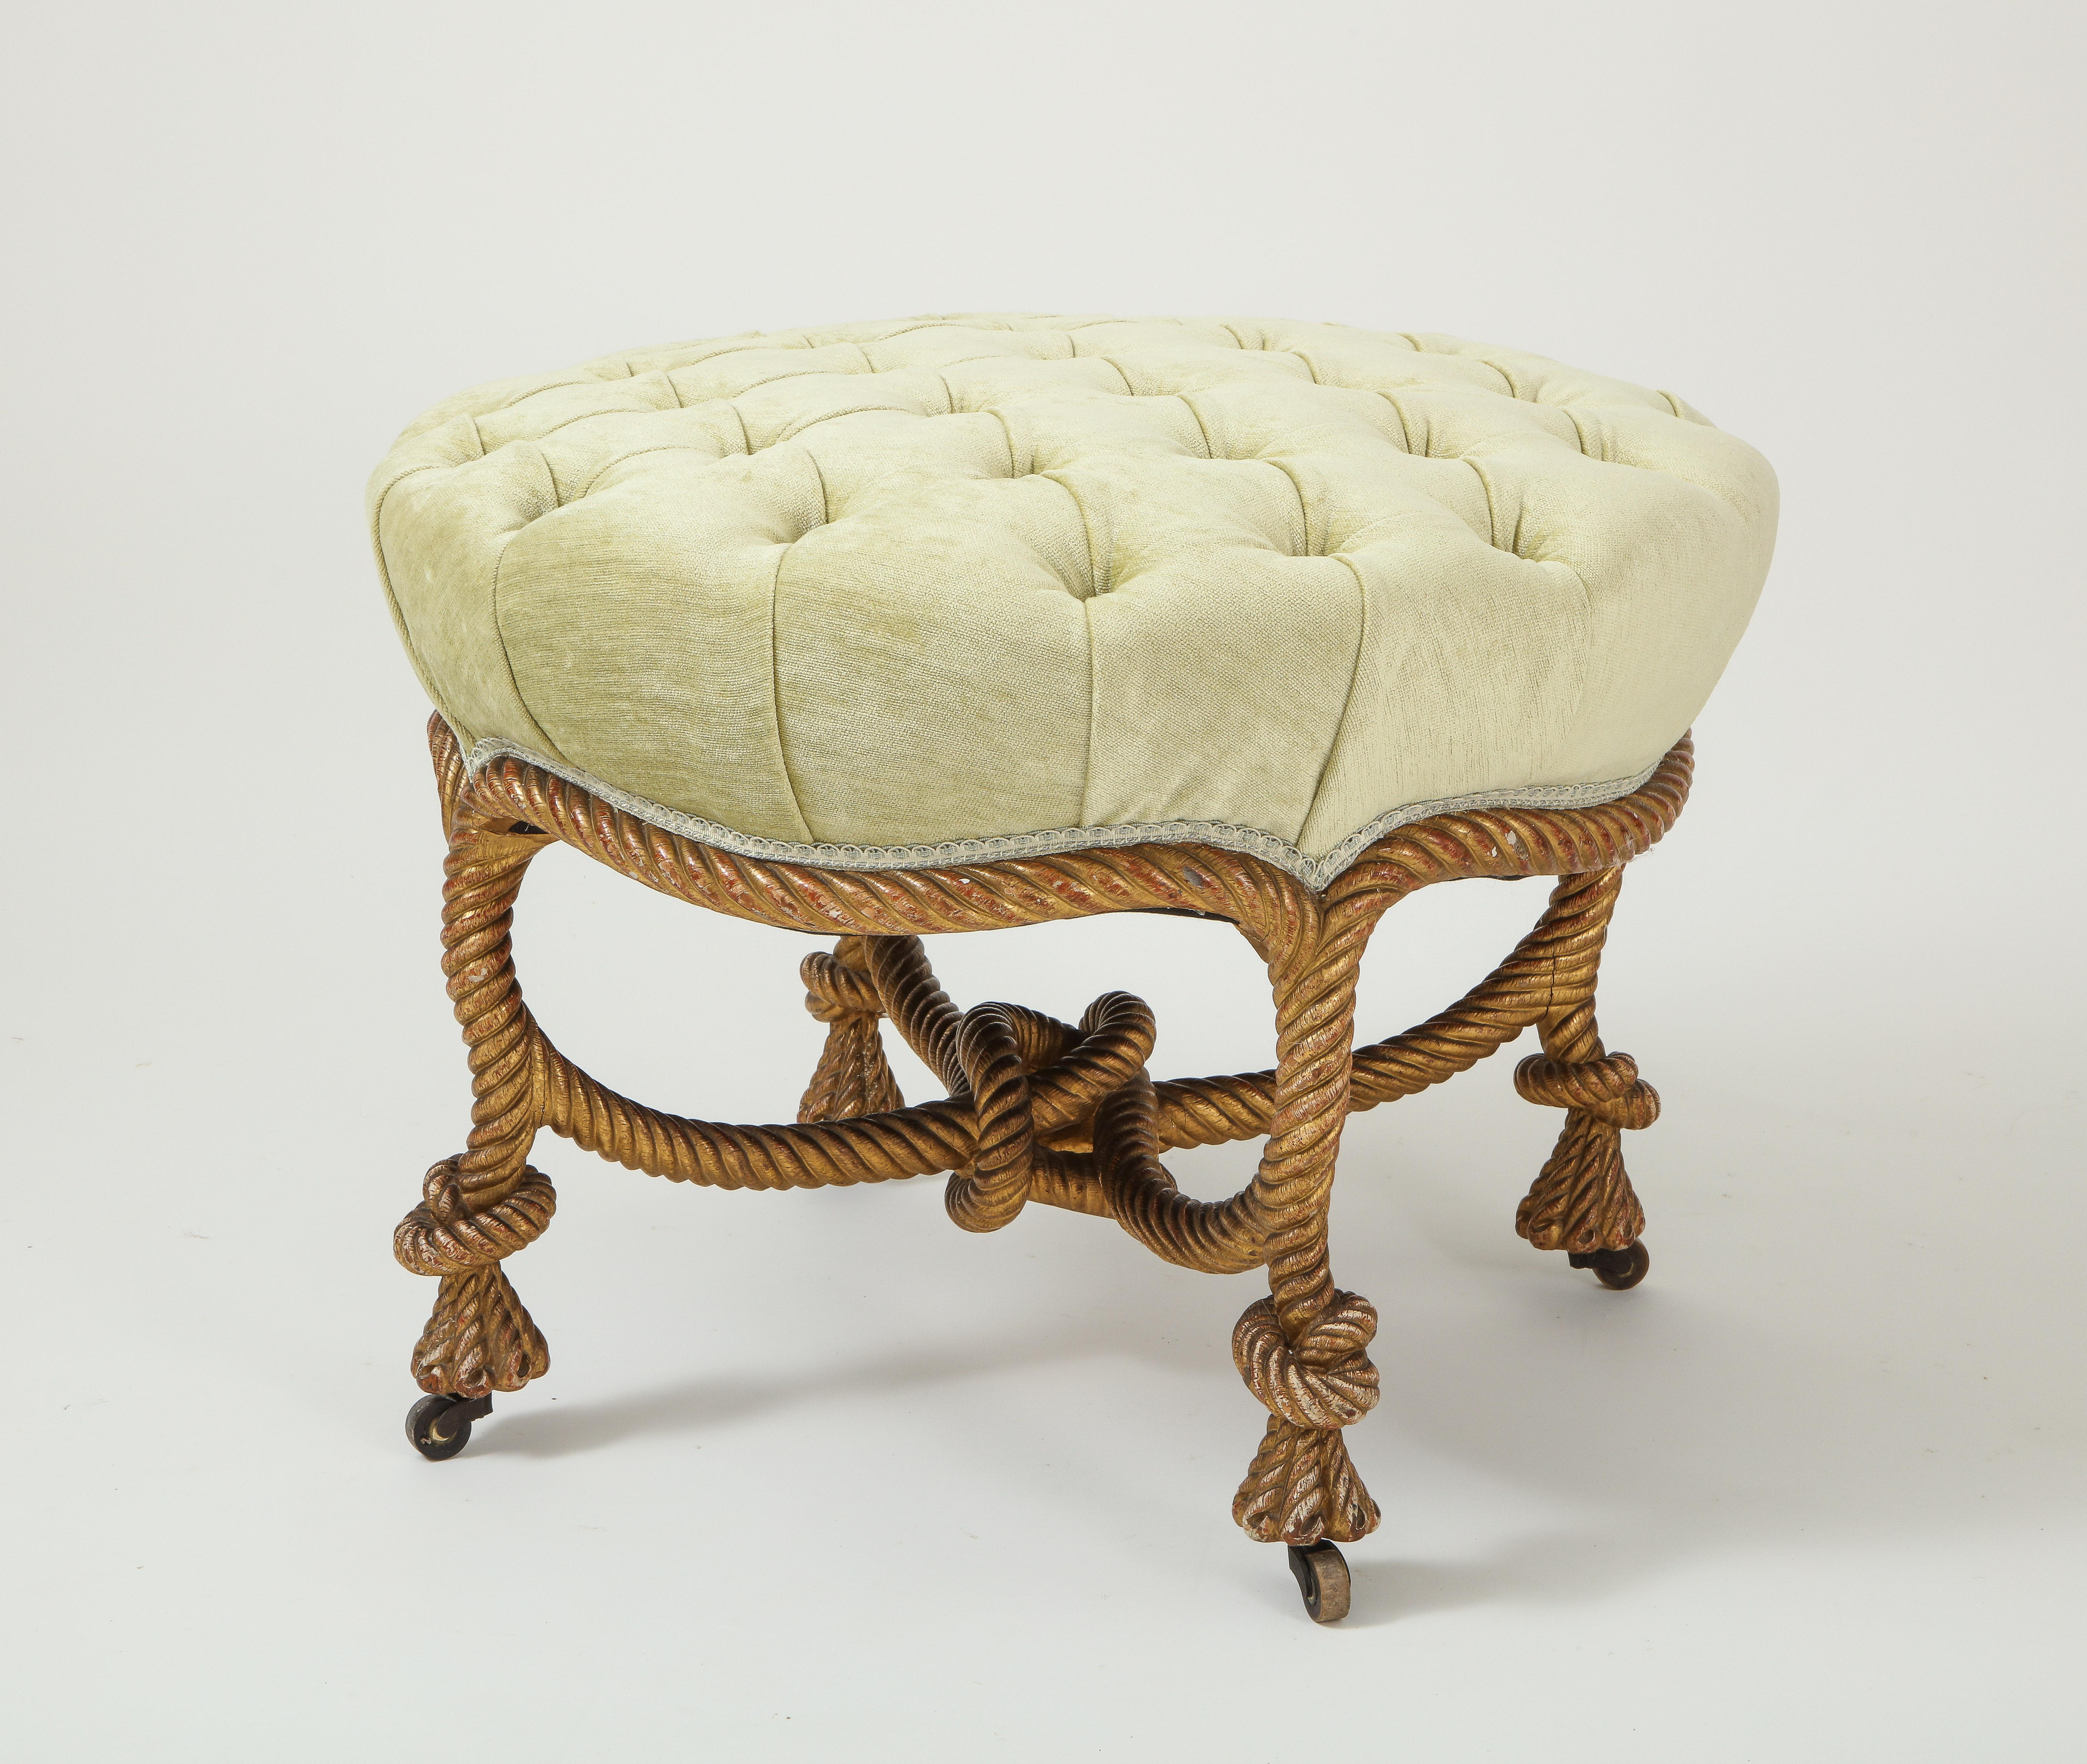 The tufted round seat upholster in apple green velvet, raised on rope carved legs joined by an X-form stretcher centered by a knot, on casters.